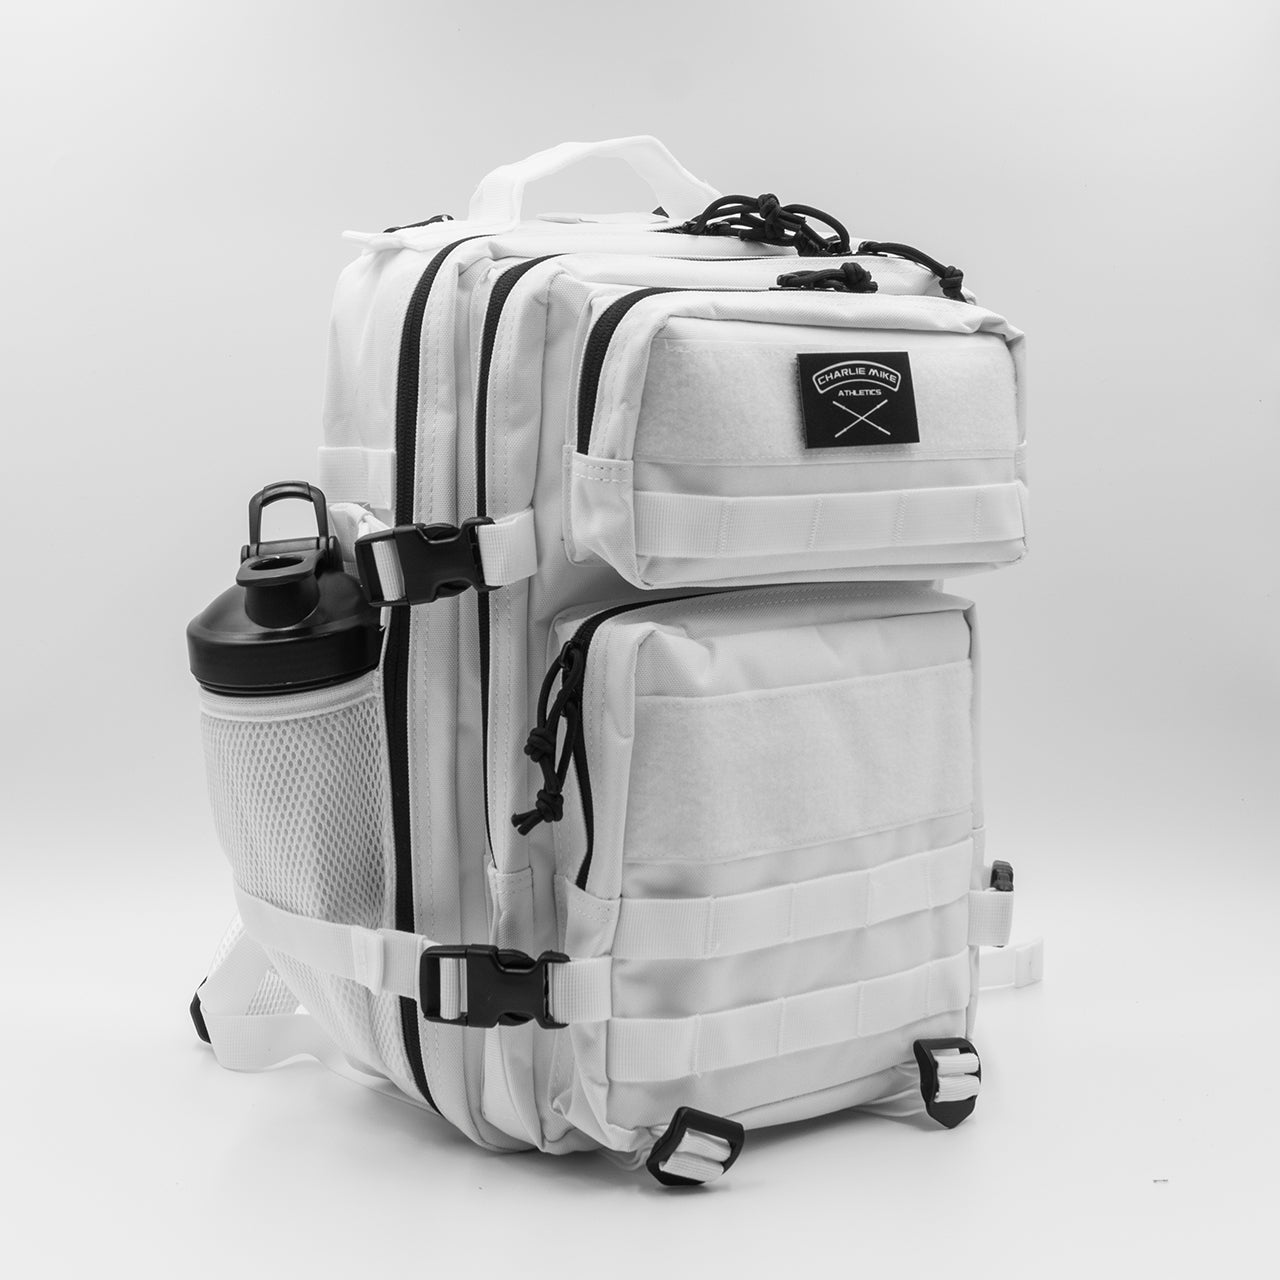 REDCON-1 Pack 25L - FLASH WHITE